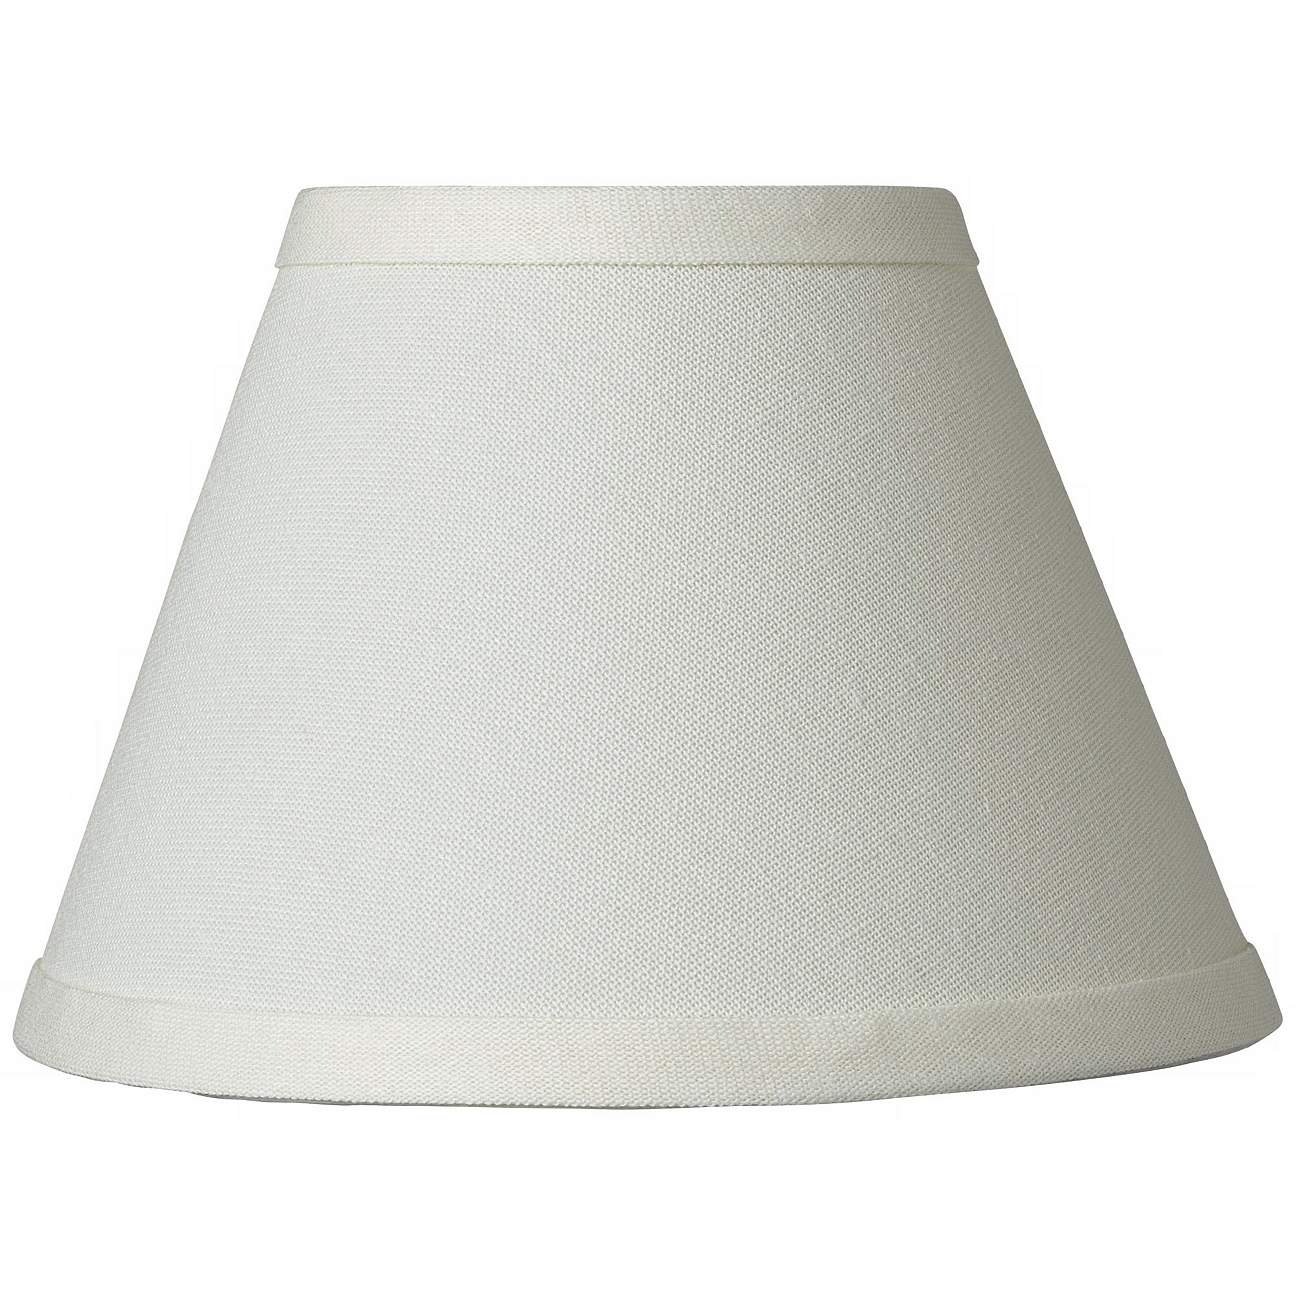 Cream Chandelier Lamp Shade 3.5x7x5 (Clip-On) - #29871 | Lamps Plus